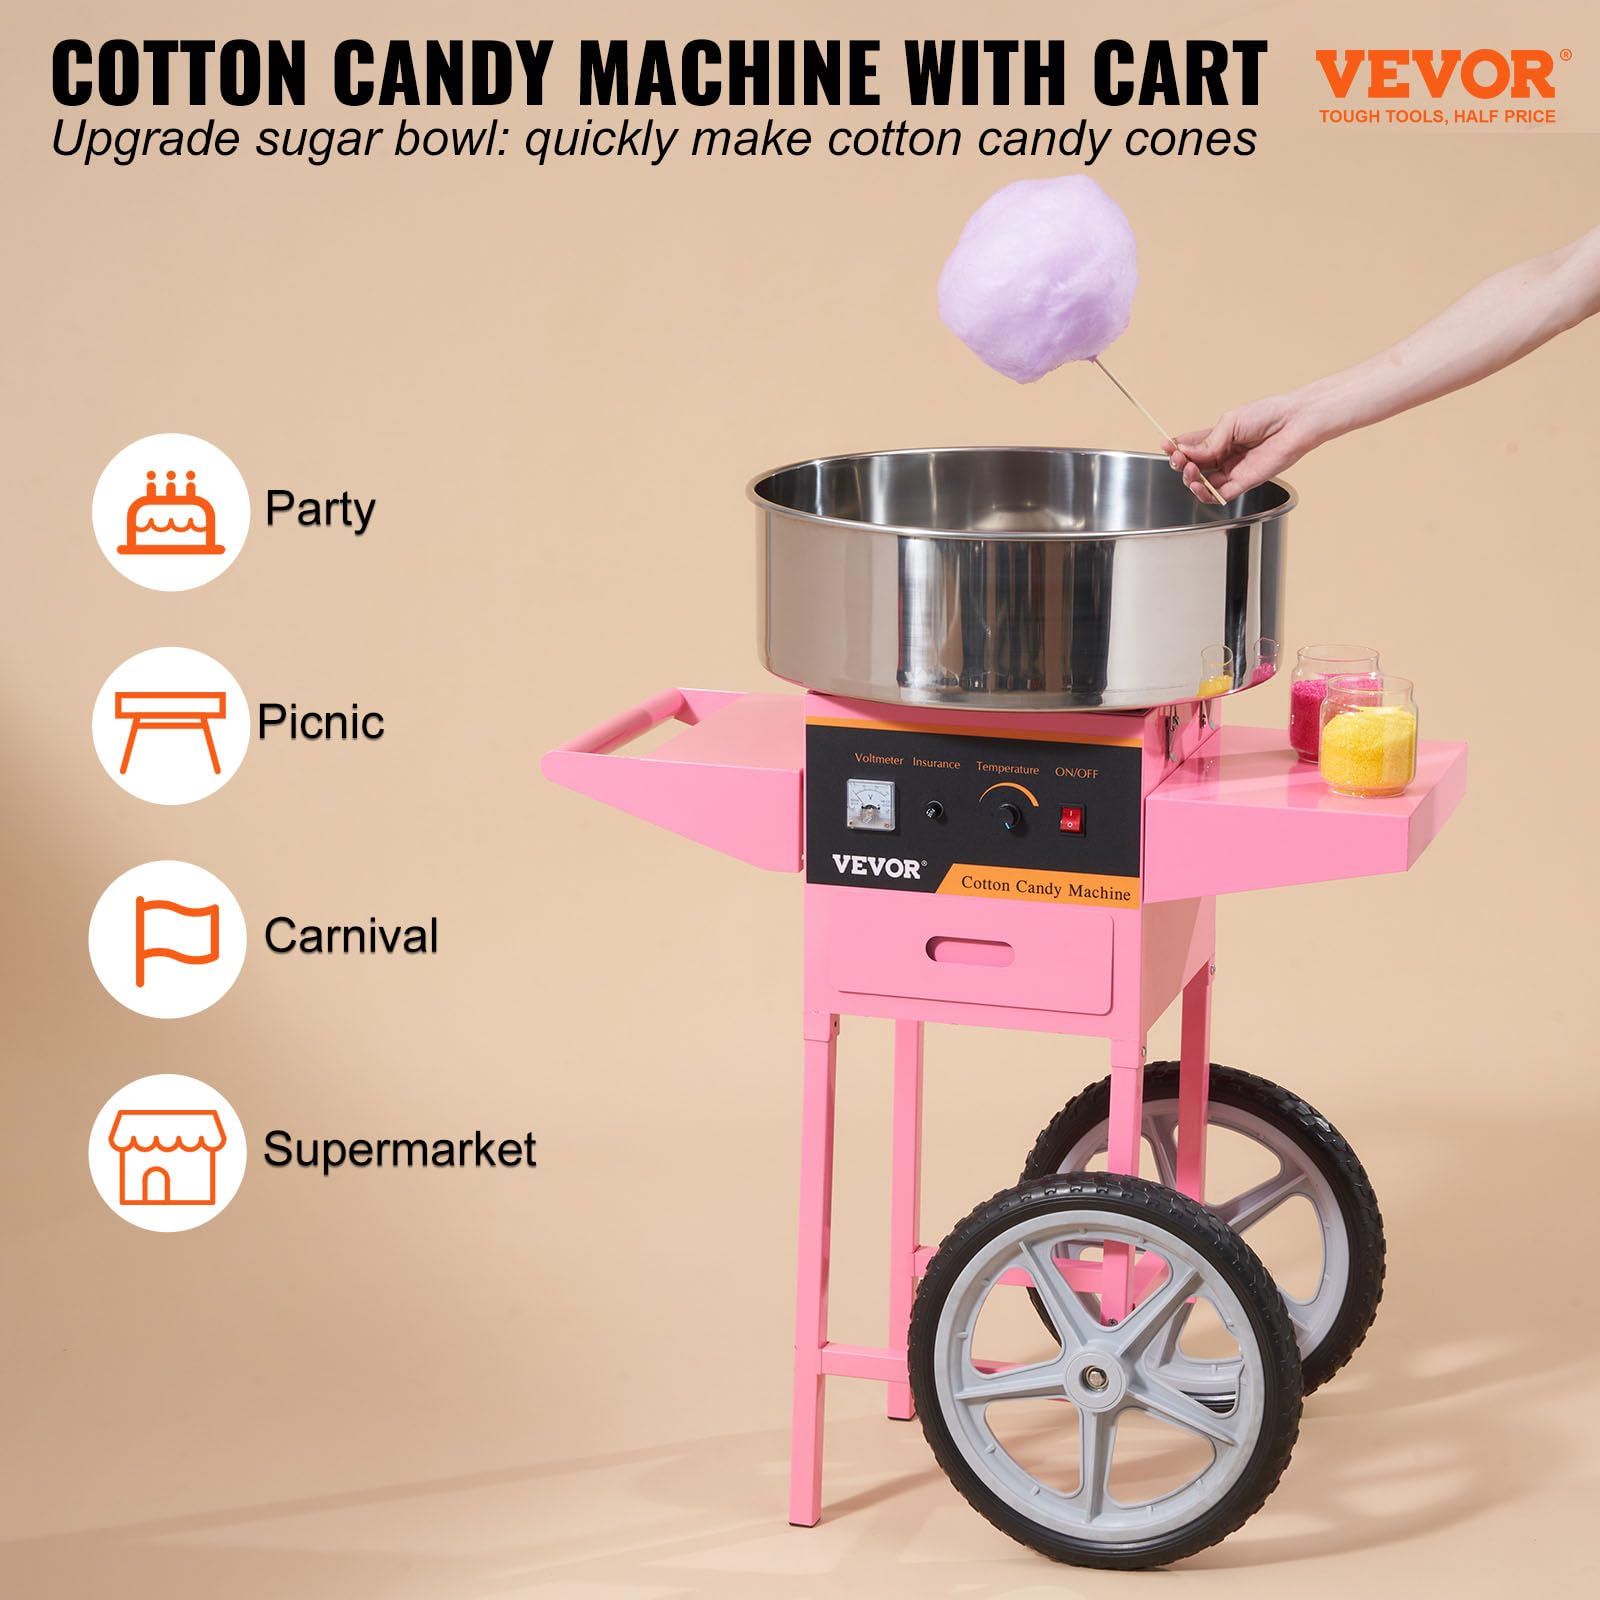 VBENLEM Commercial Cotton Candy Machine with Cart, Electric Floss Maker with Stainless Steel Bowl, Sugar Scoop and Drawer, for Family and Various Party, Pink